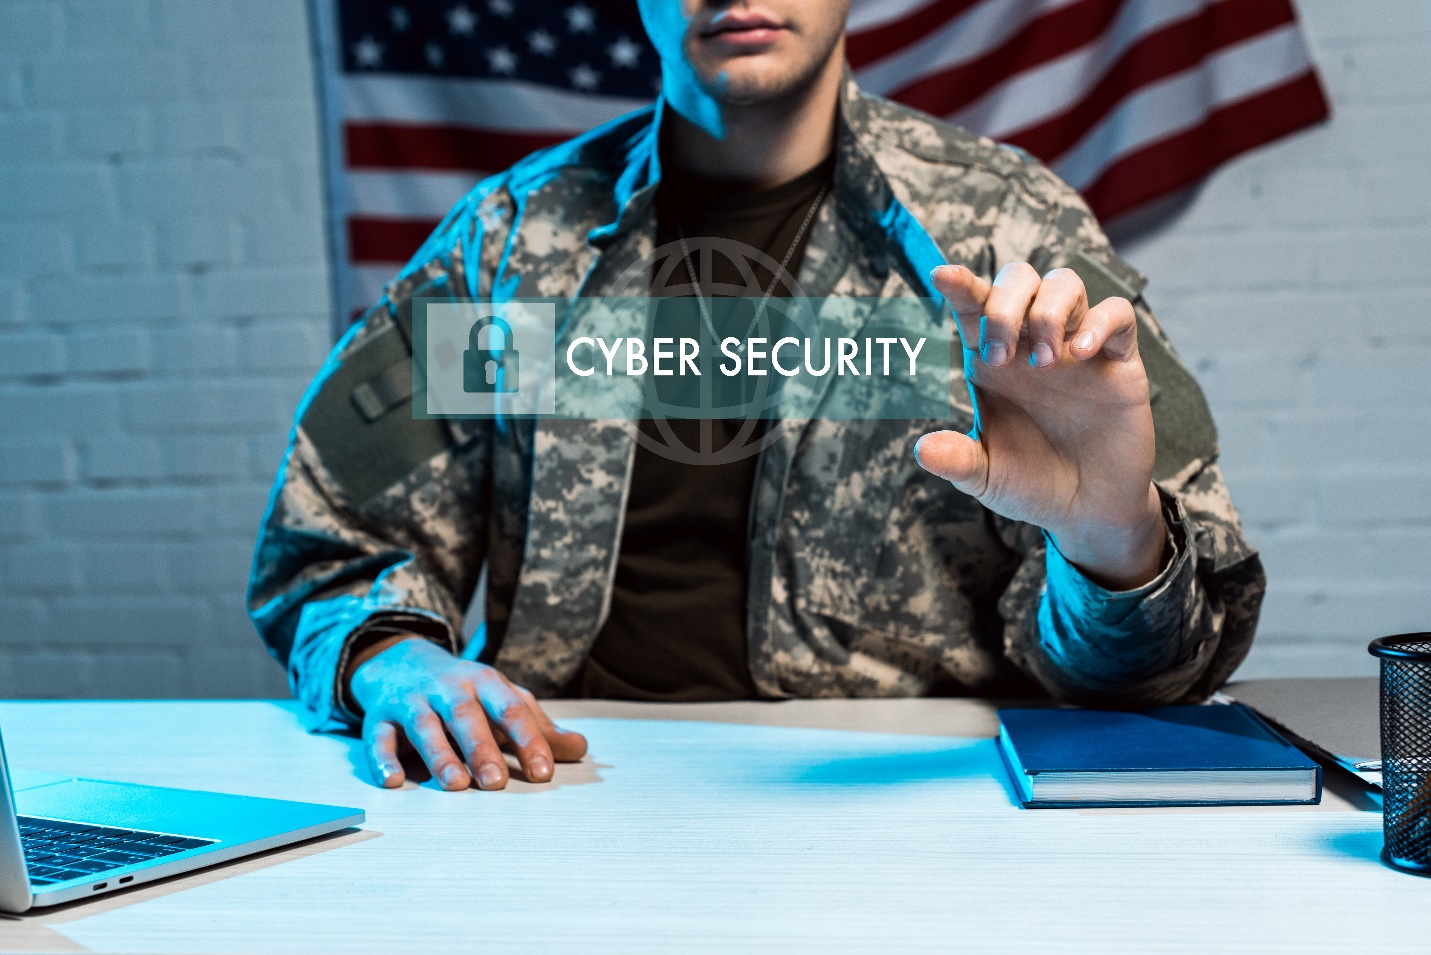 military man in uniform gesturing near cyber security lettering in address bar